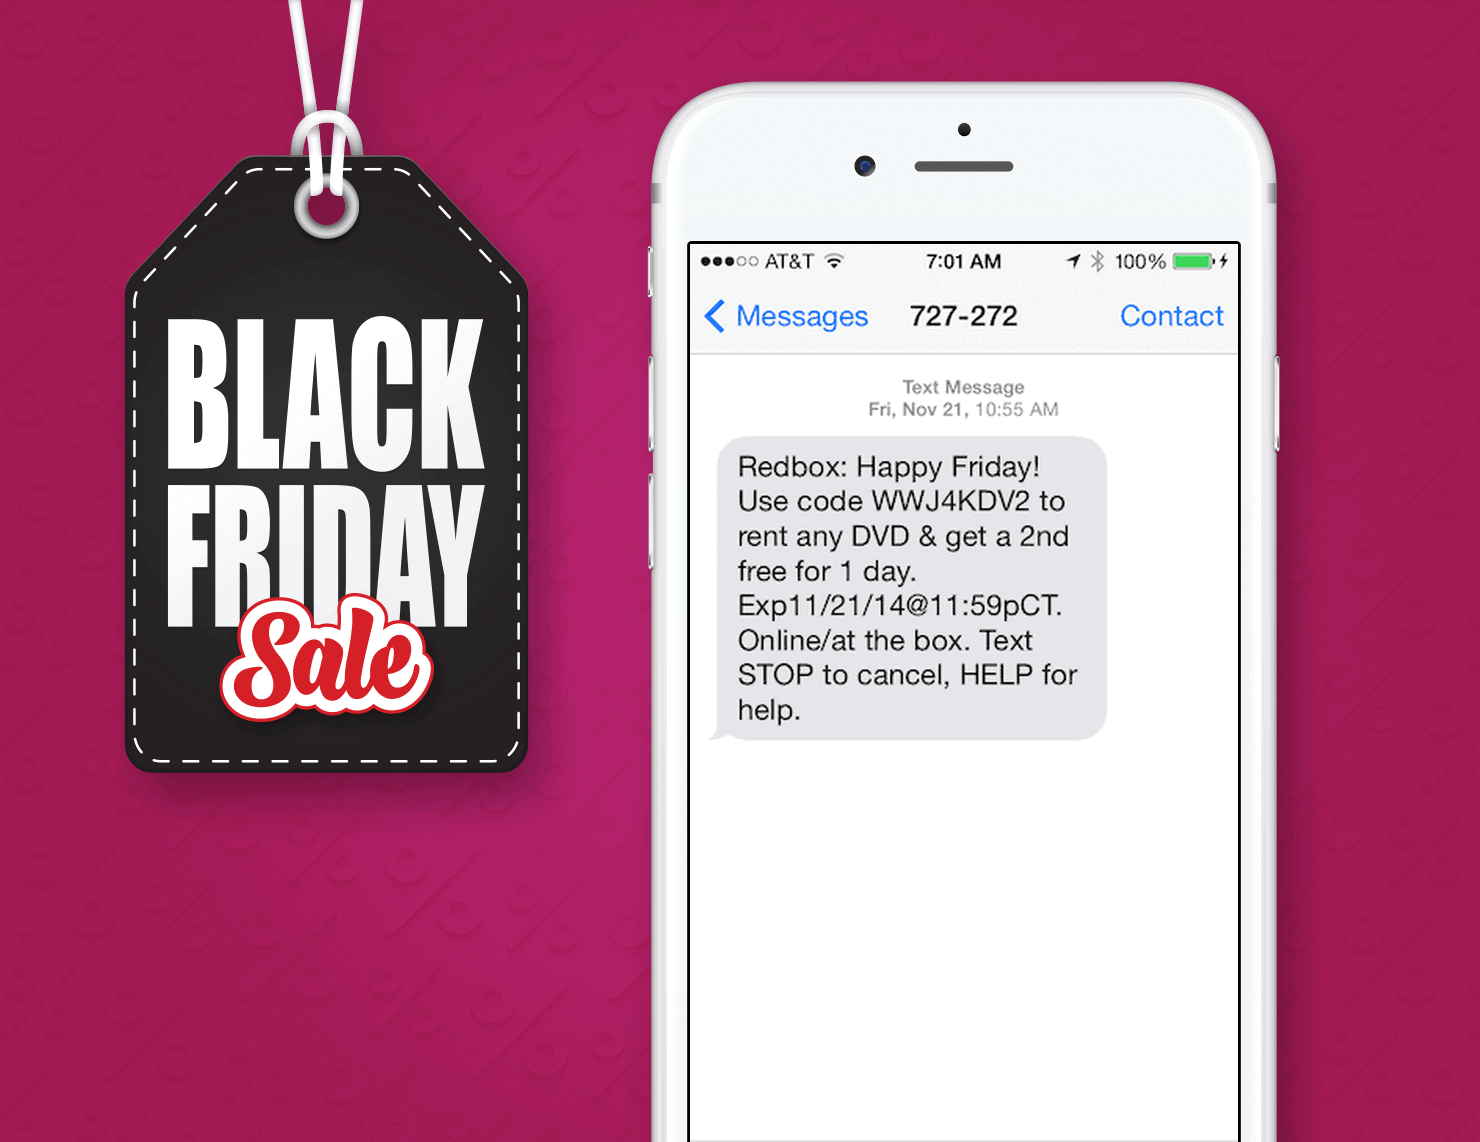 Black Friday SMS Marketing Example From Redbox